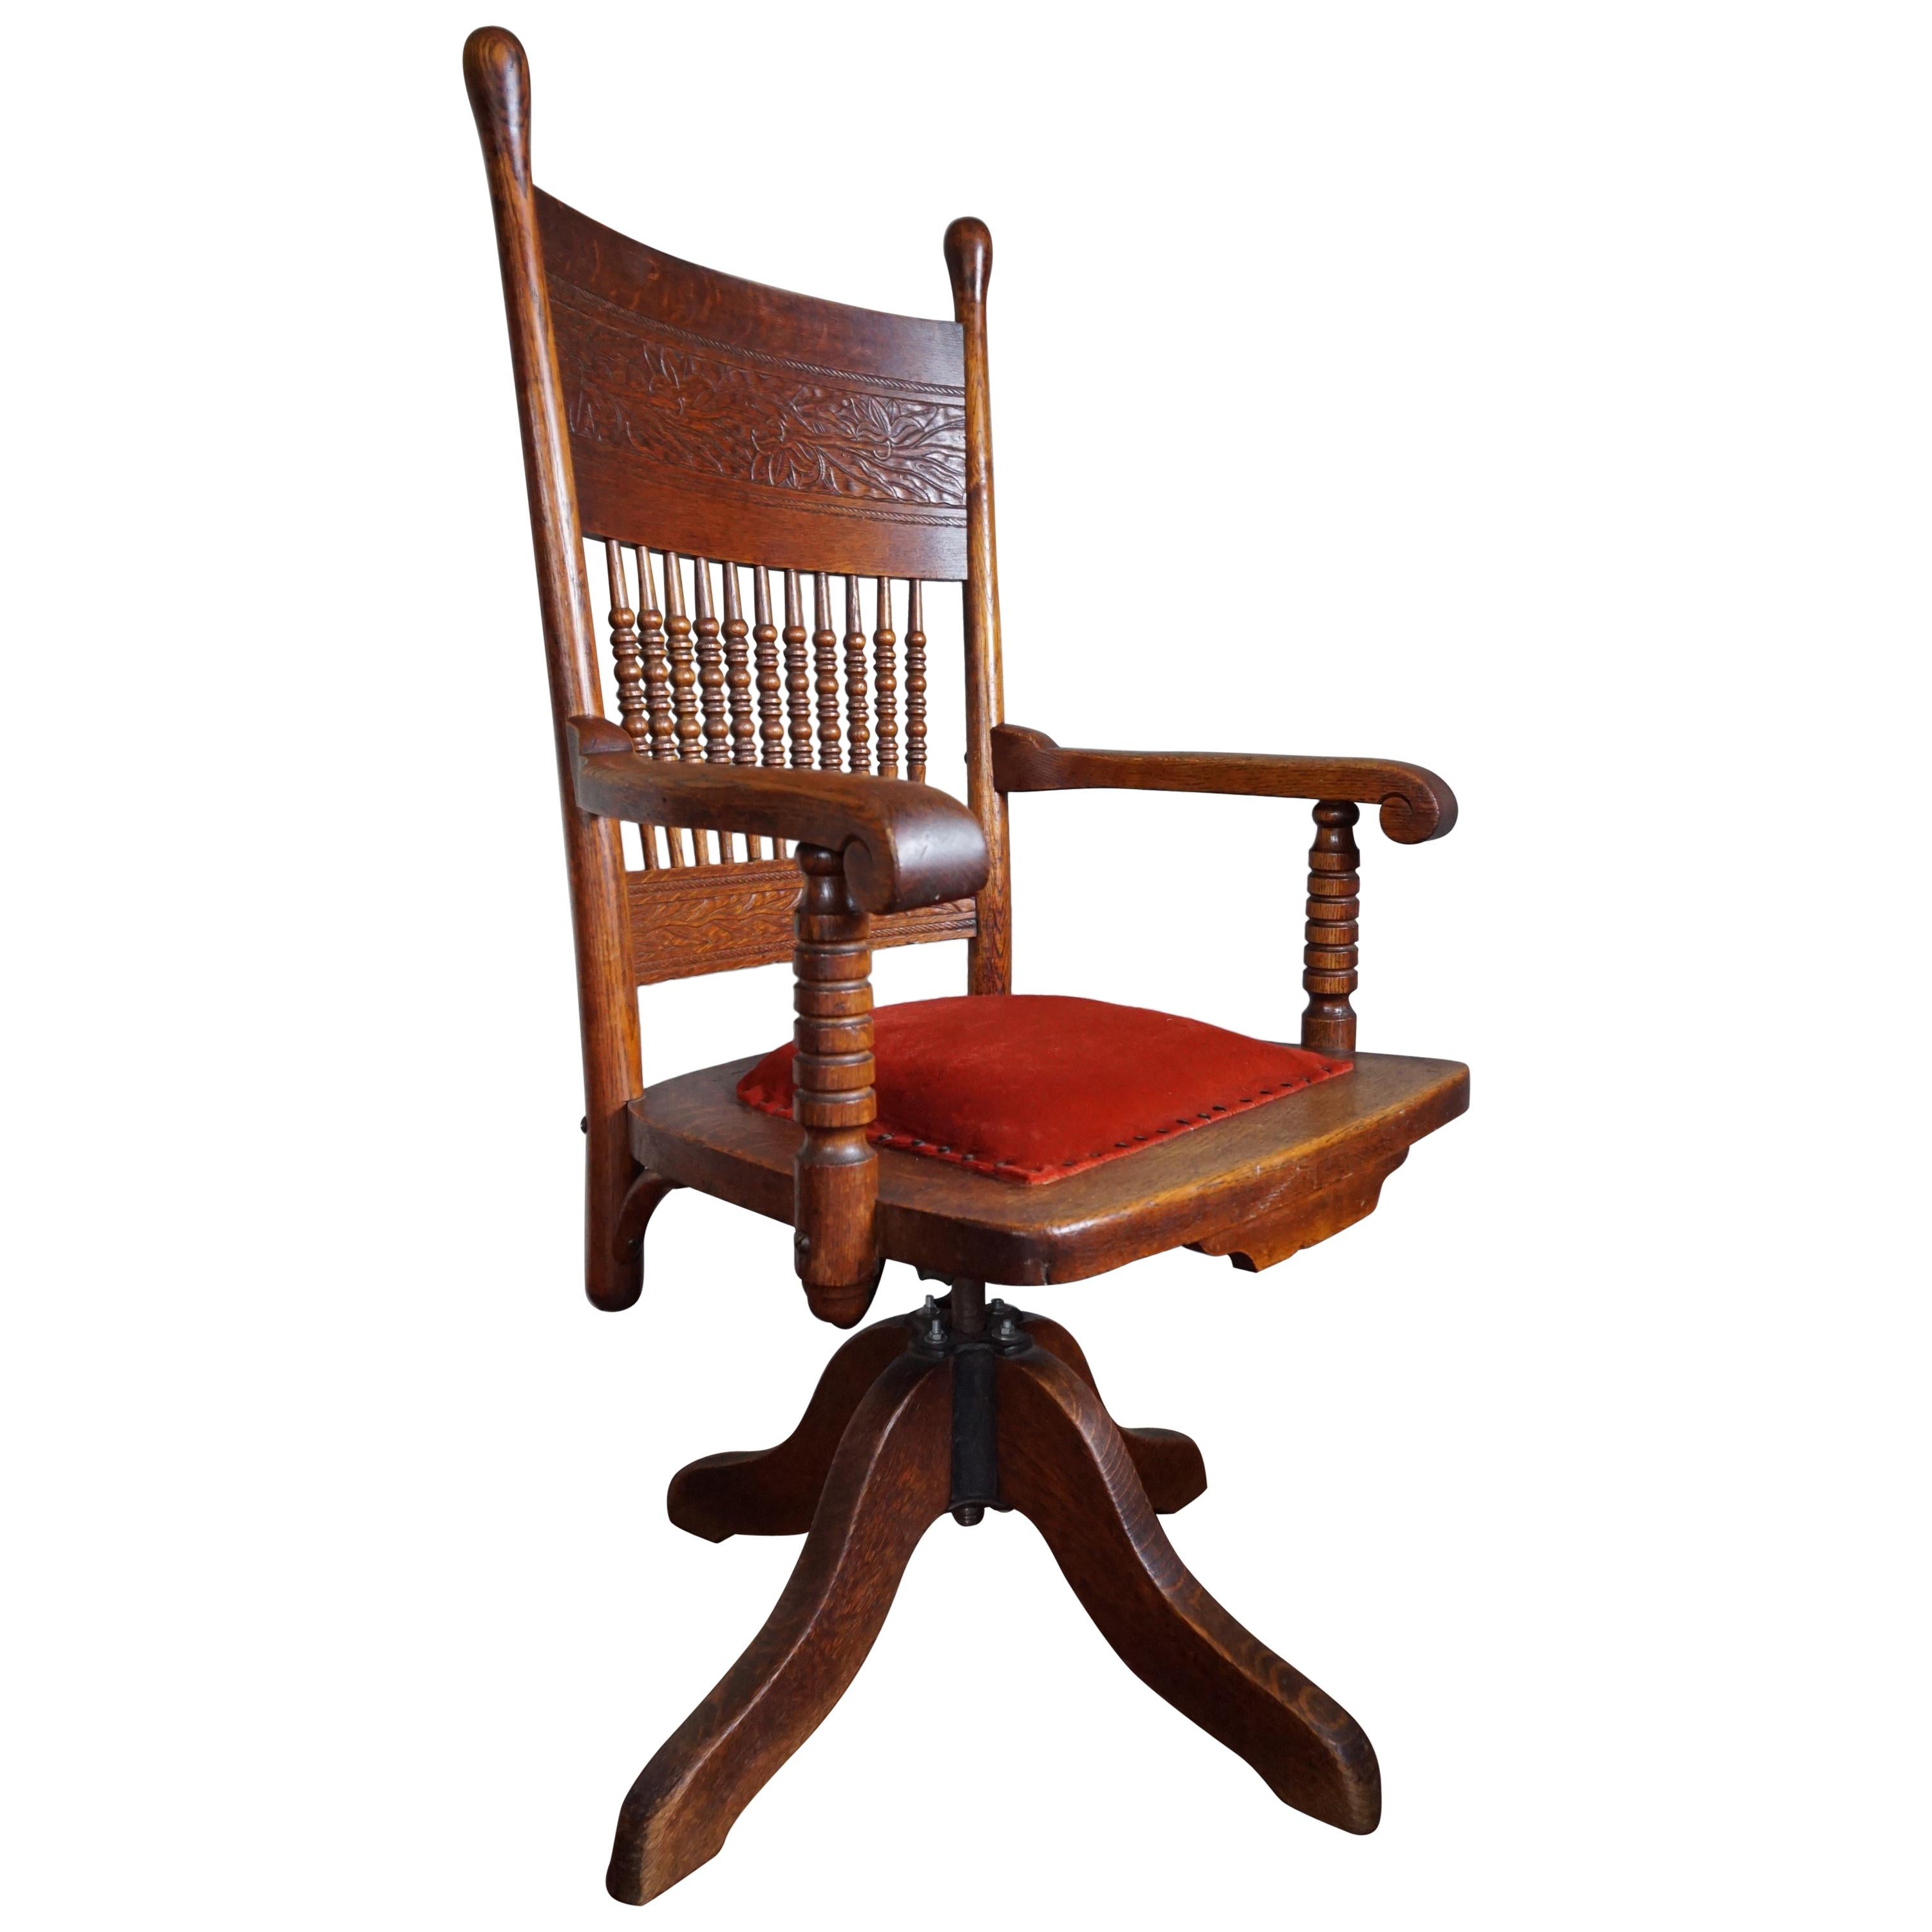 Handcrafted and Hand-Carved Adjustable American Arts & Crafts Oak Desk Chair